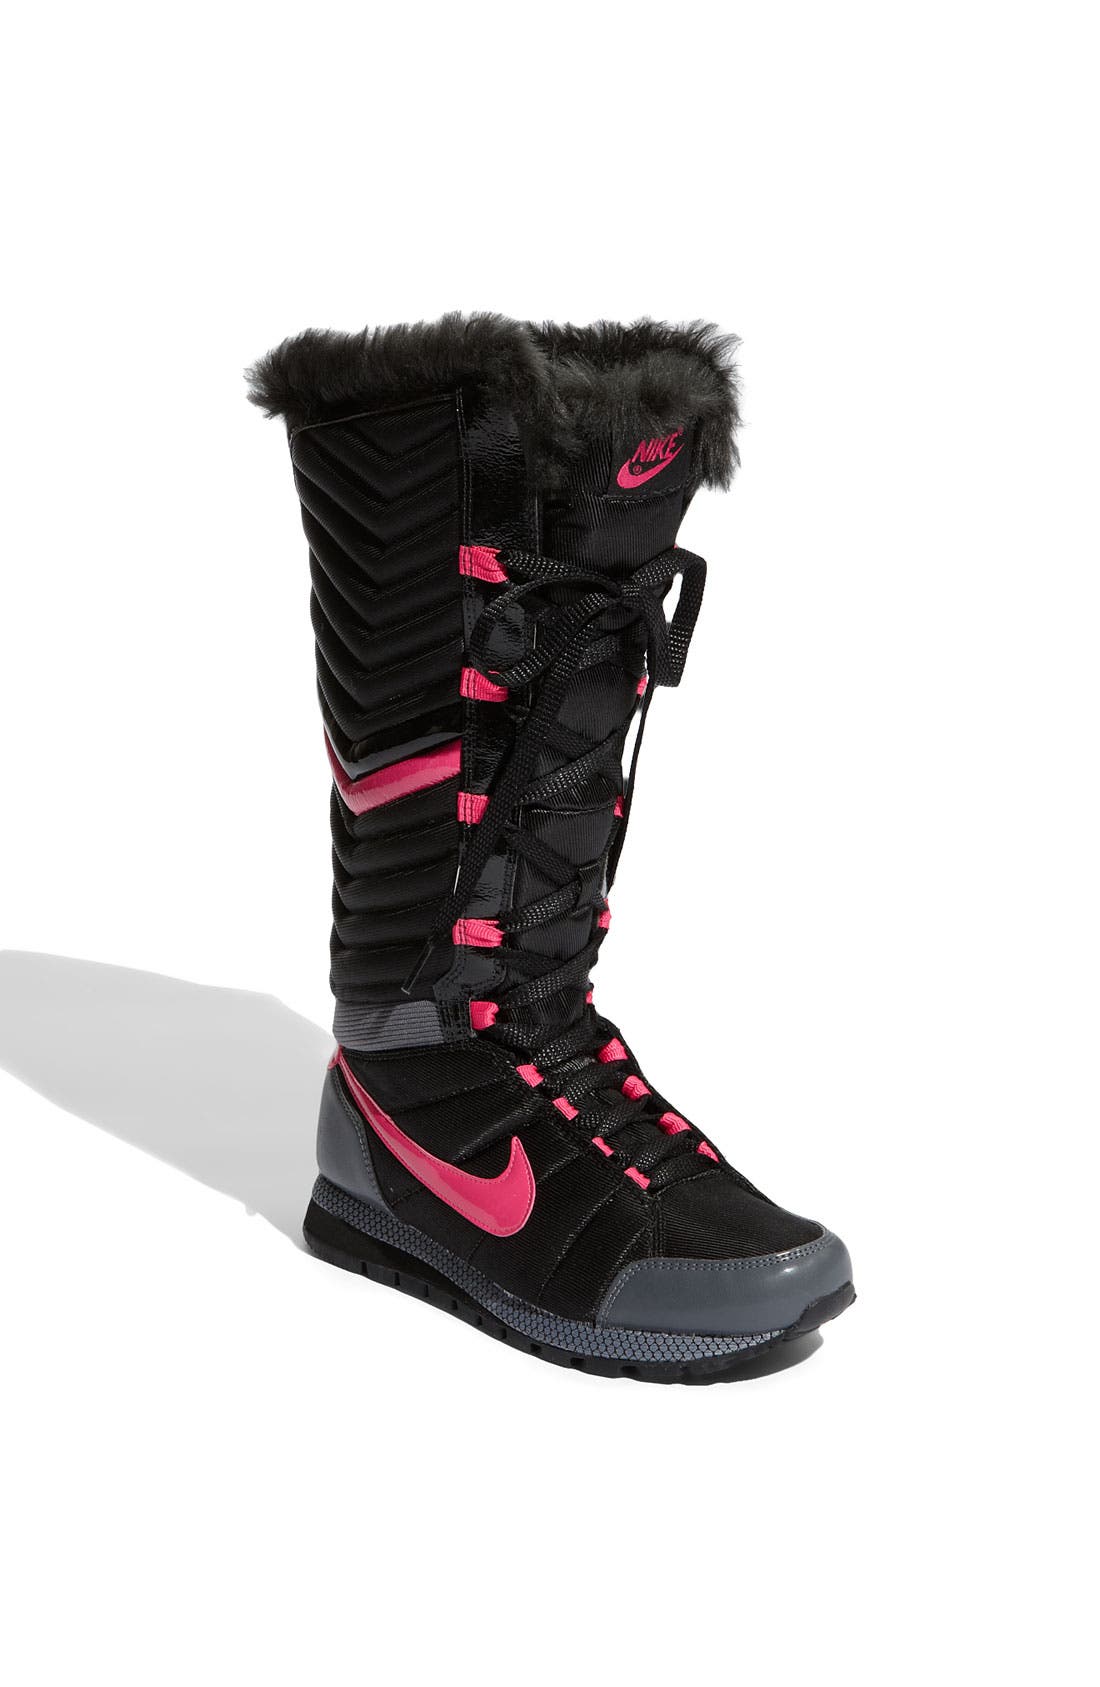 nike boots for snow